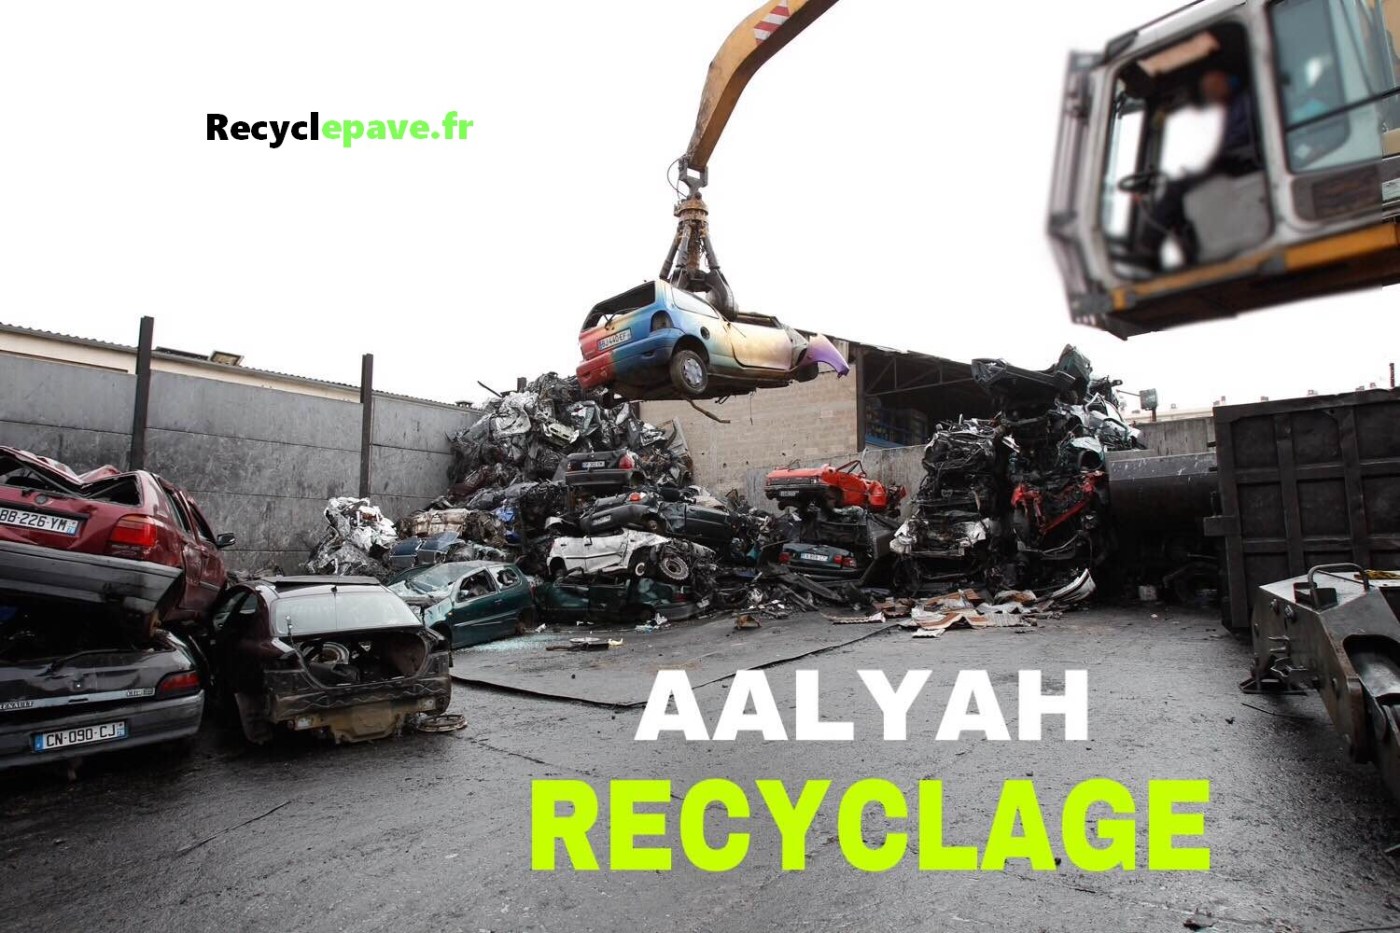 AALYAH Recyclage